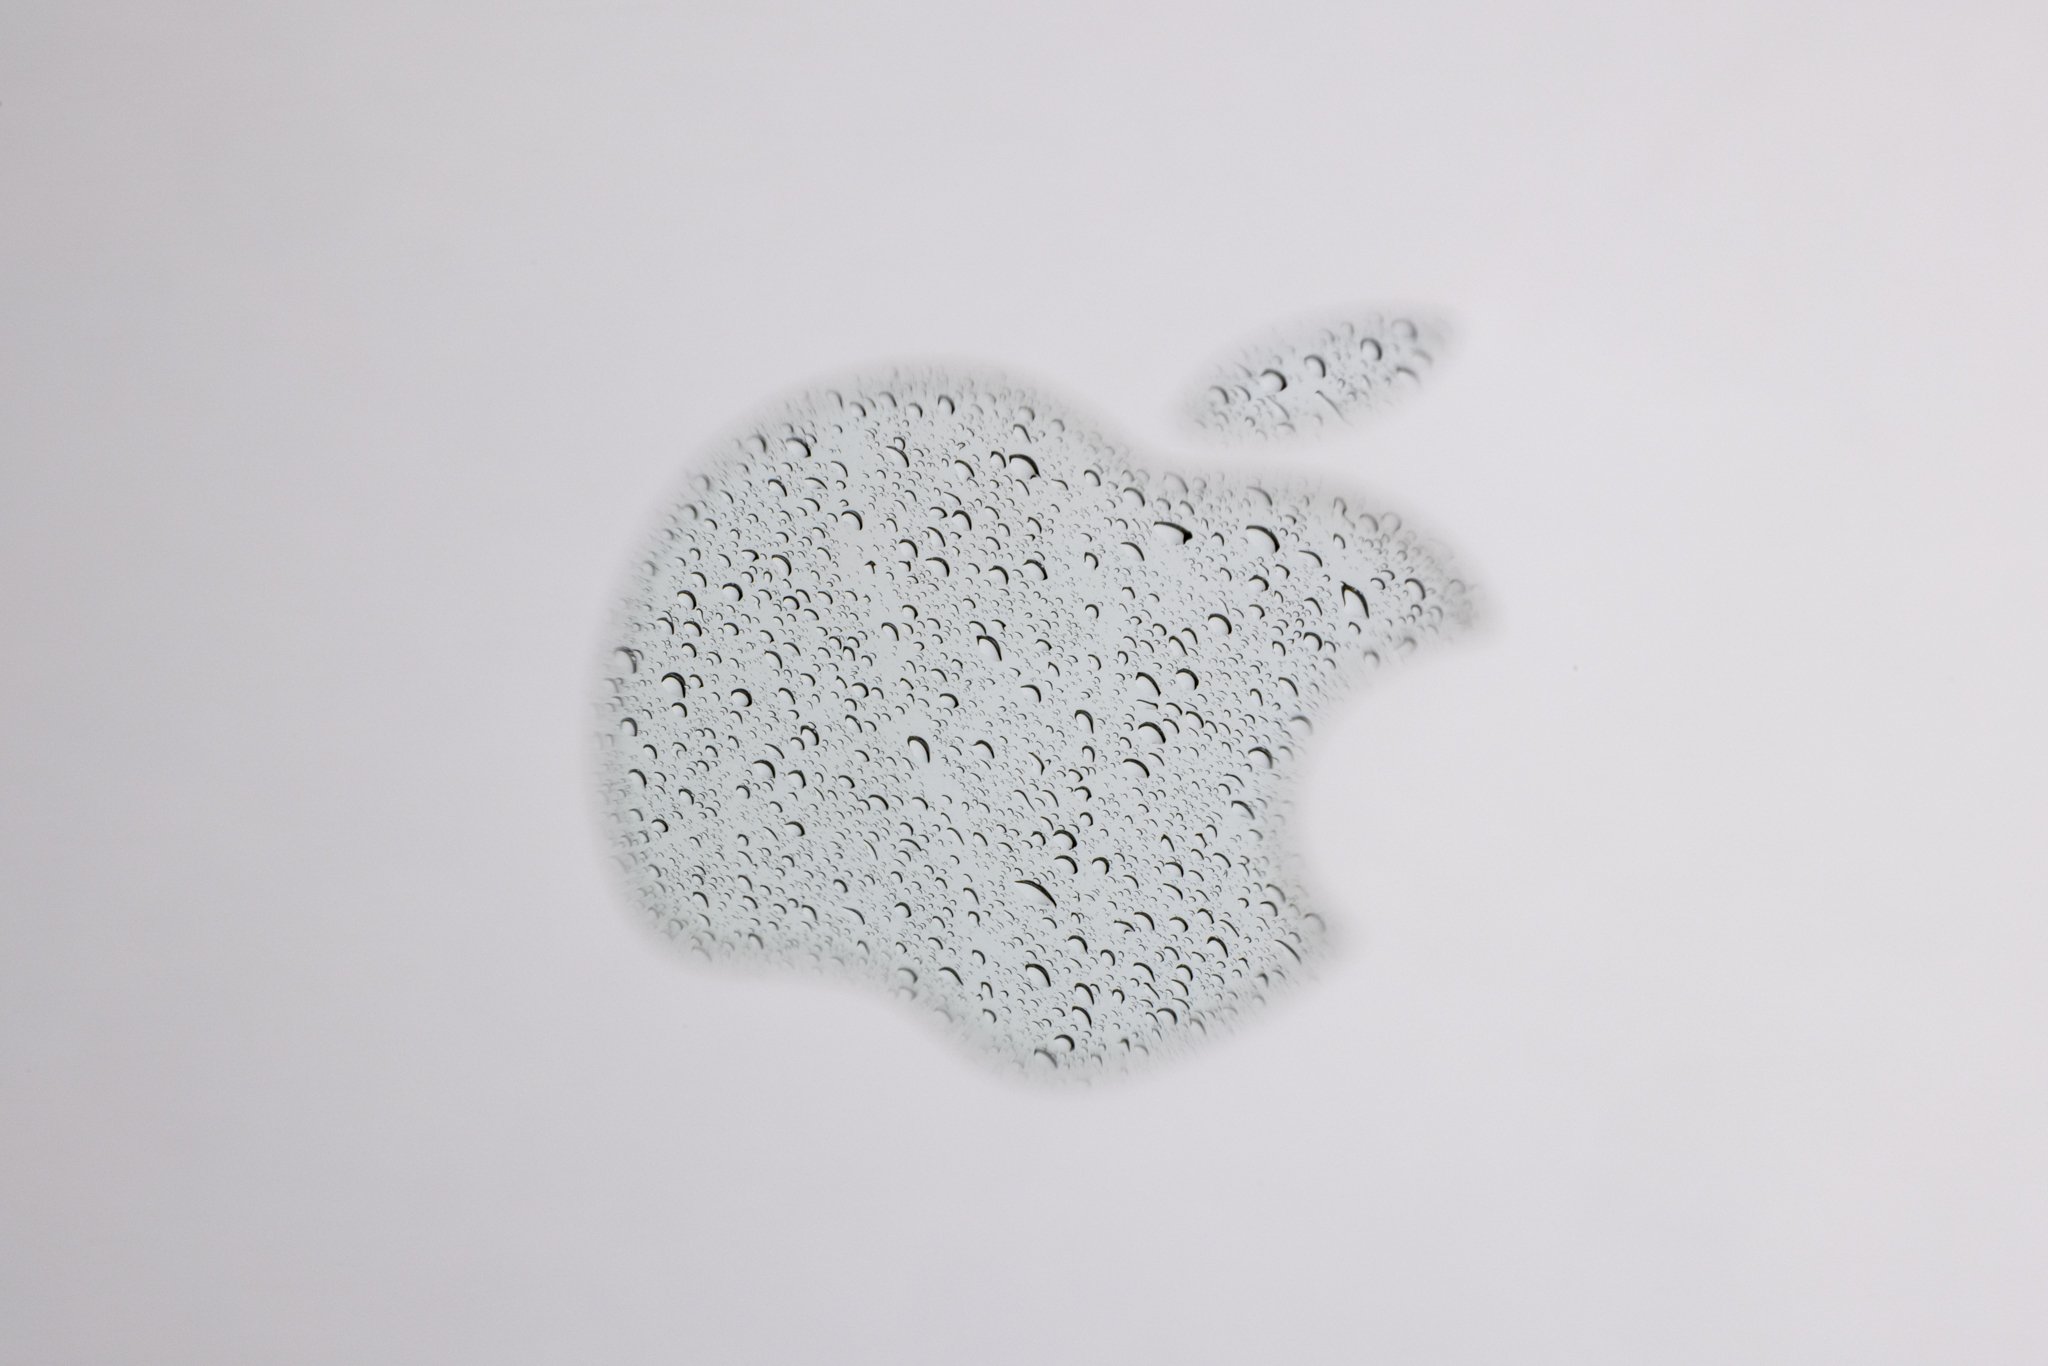 A reflection of rain in the Apple logo on a laptop photographed at f/32